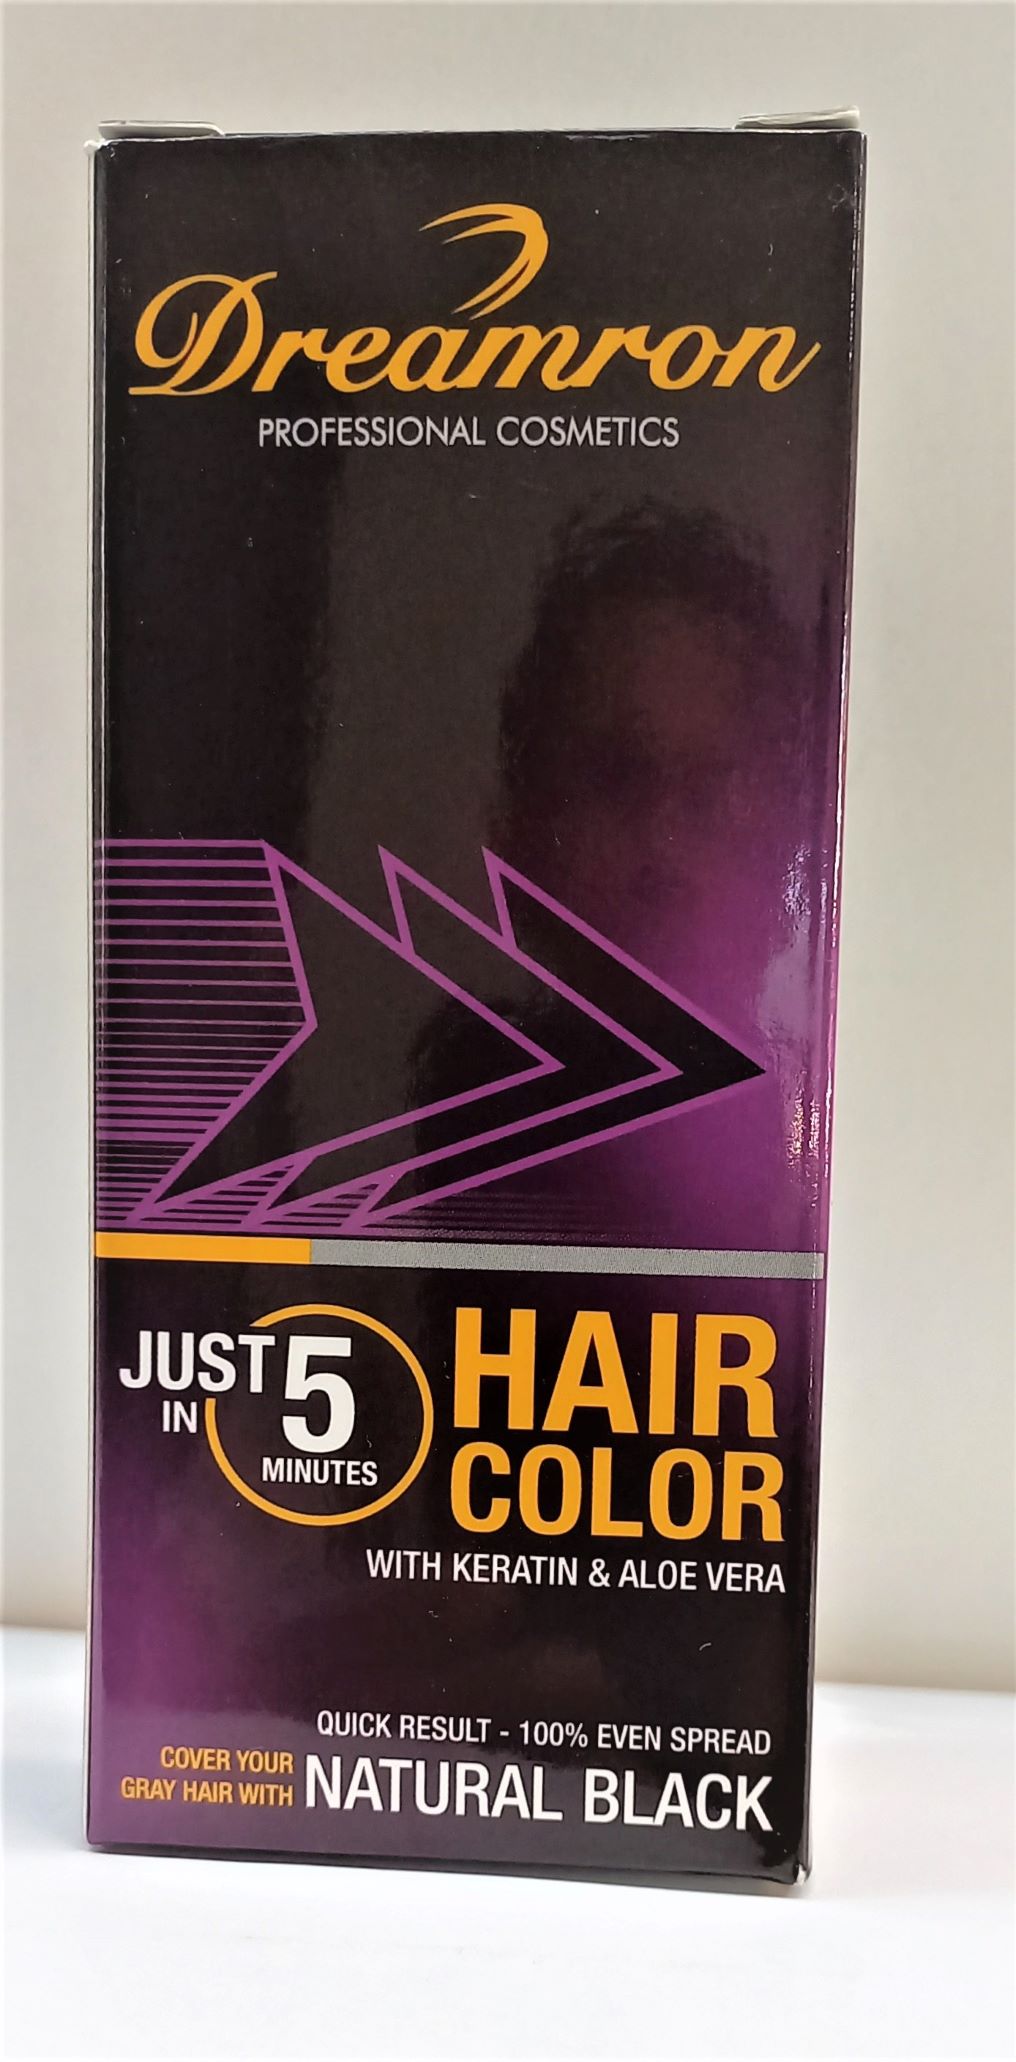 Dreamron Permanent Hair Color Ready to Use Hair Dye Hair Gray coverage for  Men & Woman Just in 5 mts hair color Natural Black () 20ml | ShopHere